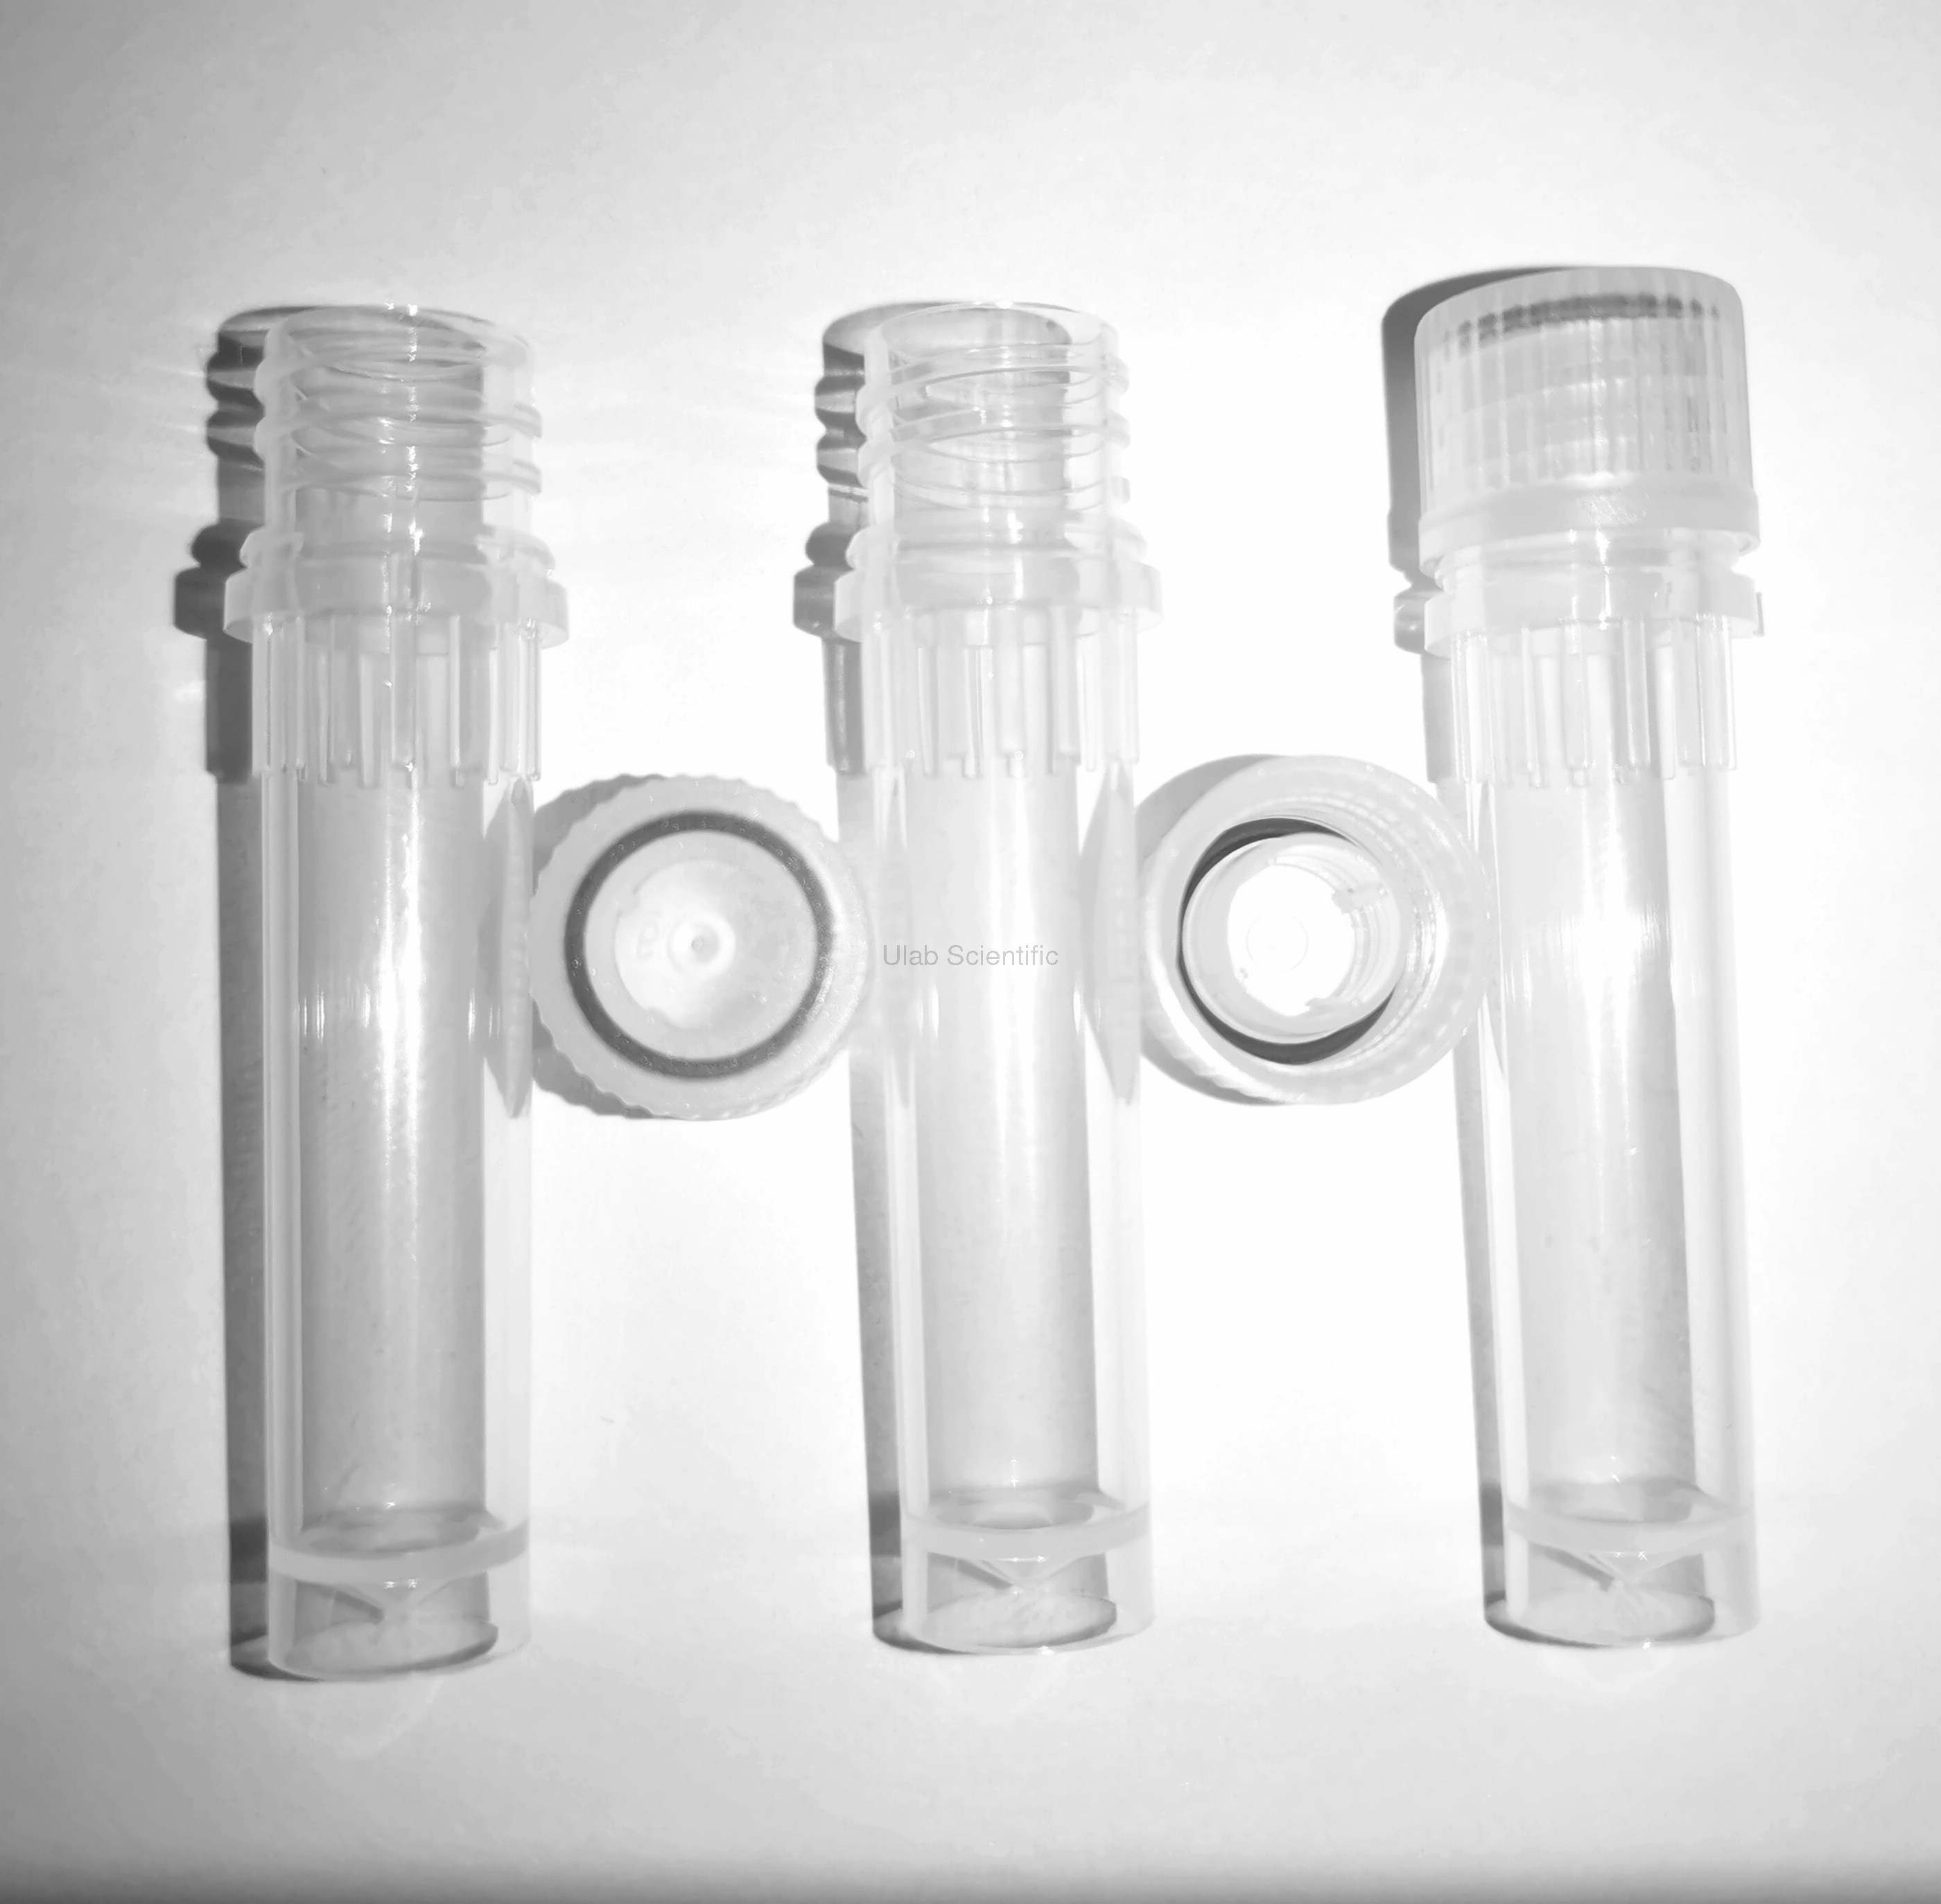 1.5ml/2.0ml Self Standing Cryotubes with Screw Caps, Polypropylene Material, Clear, Sterile, DNase-free, RNase-free, Non-pyrogenic